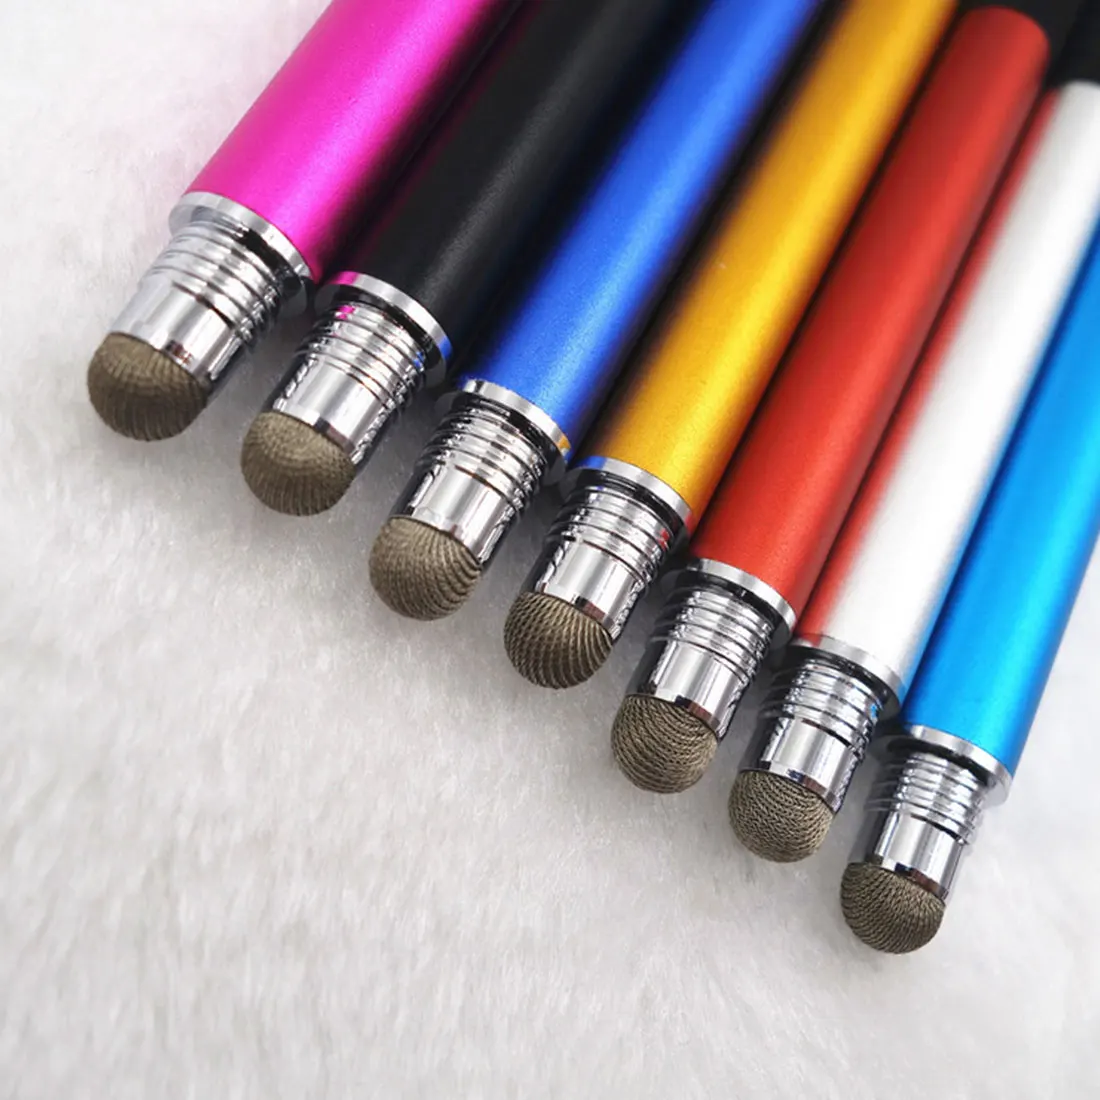 Capacitance tip 6.0 conductive cloth head touch pen universal Replaceable tip